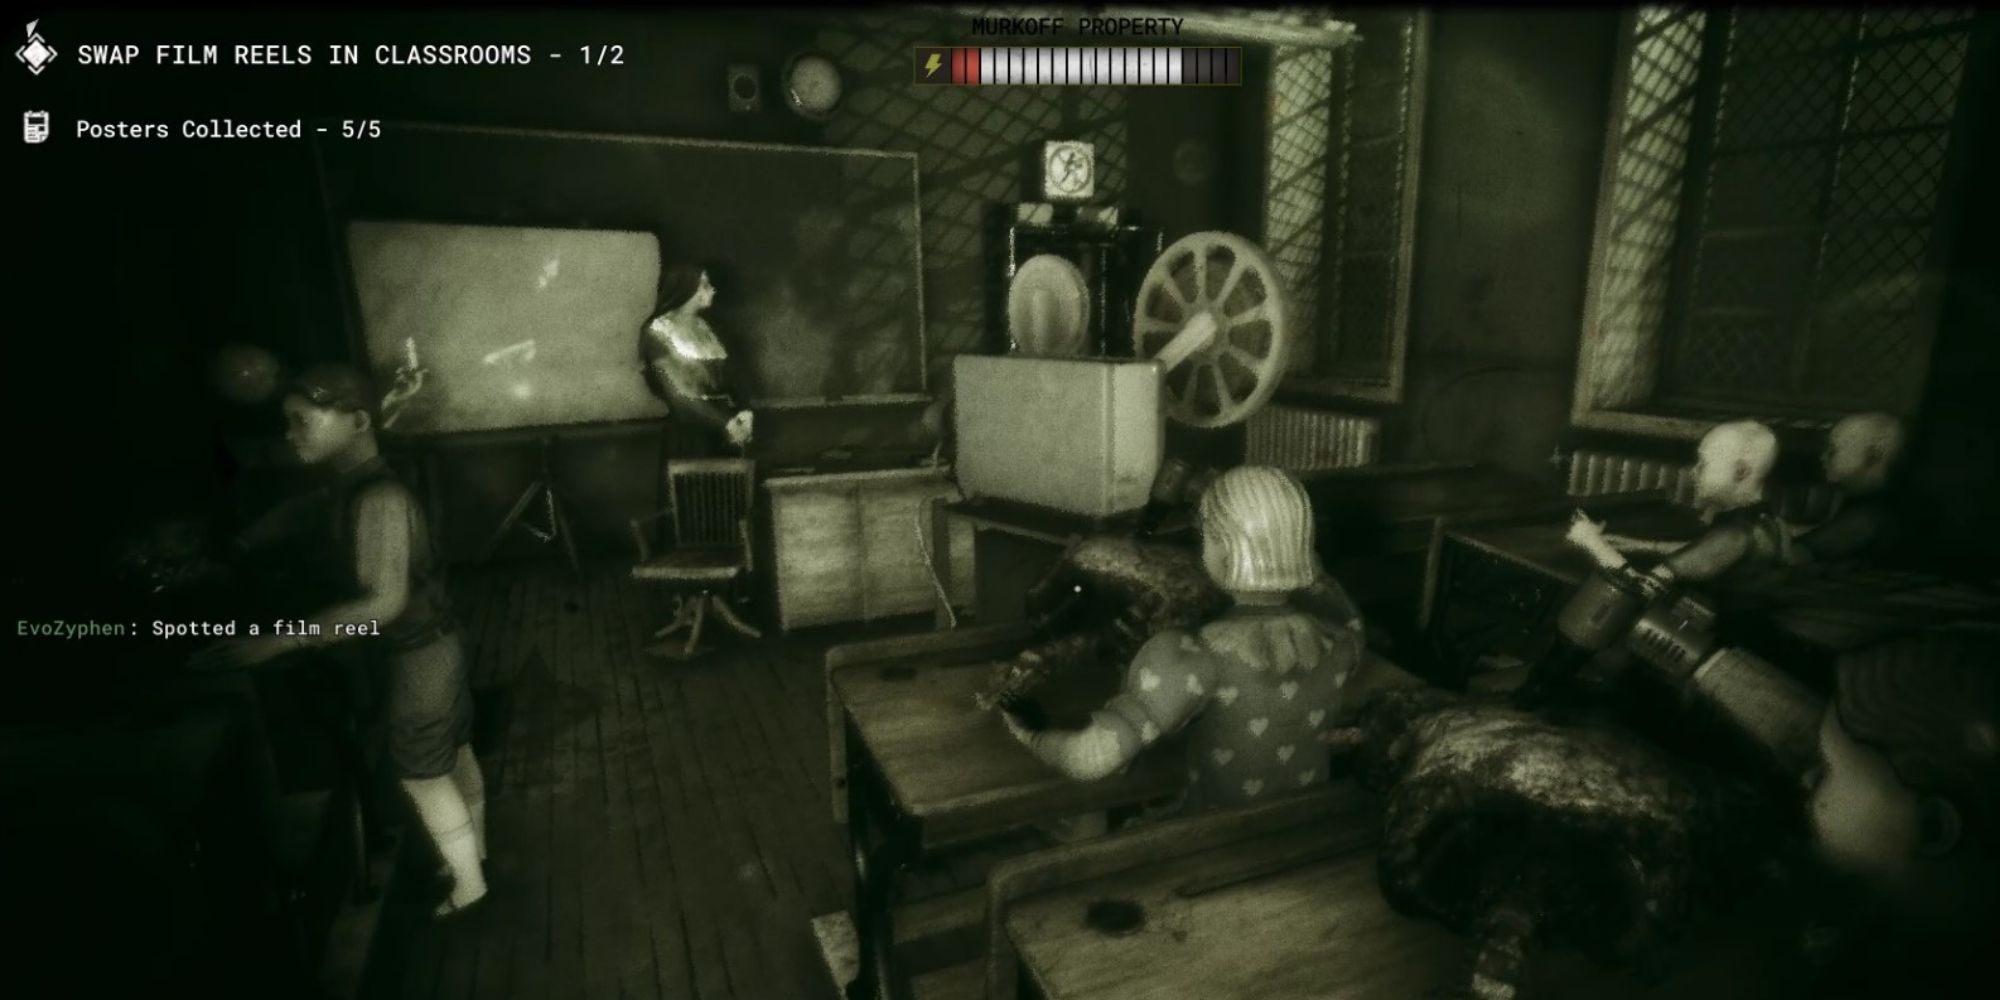 outlast trials projector in the orphanage classroom